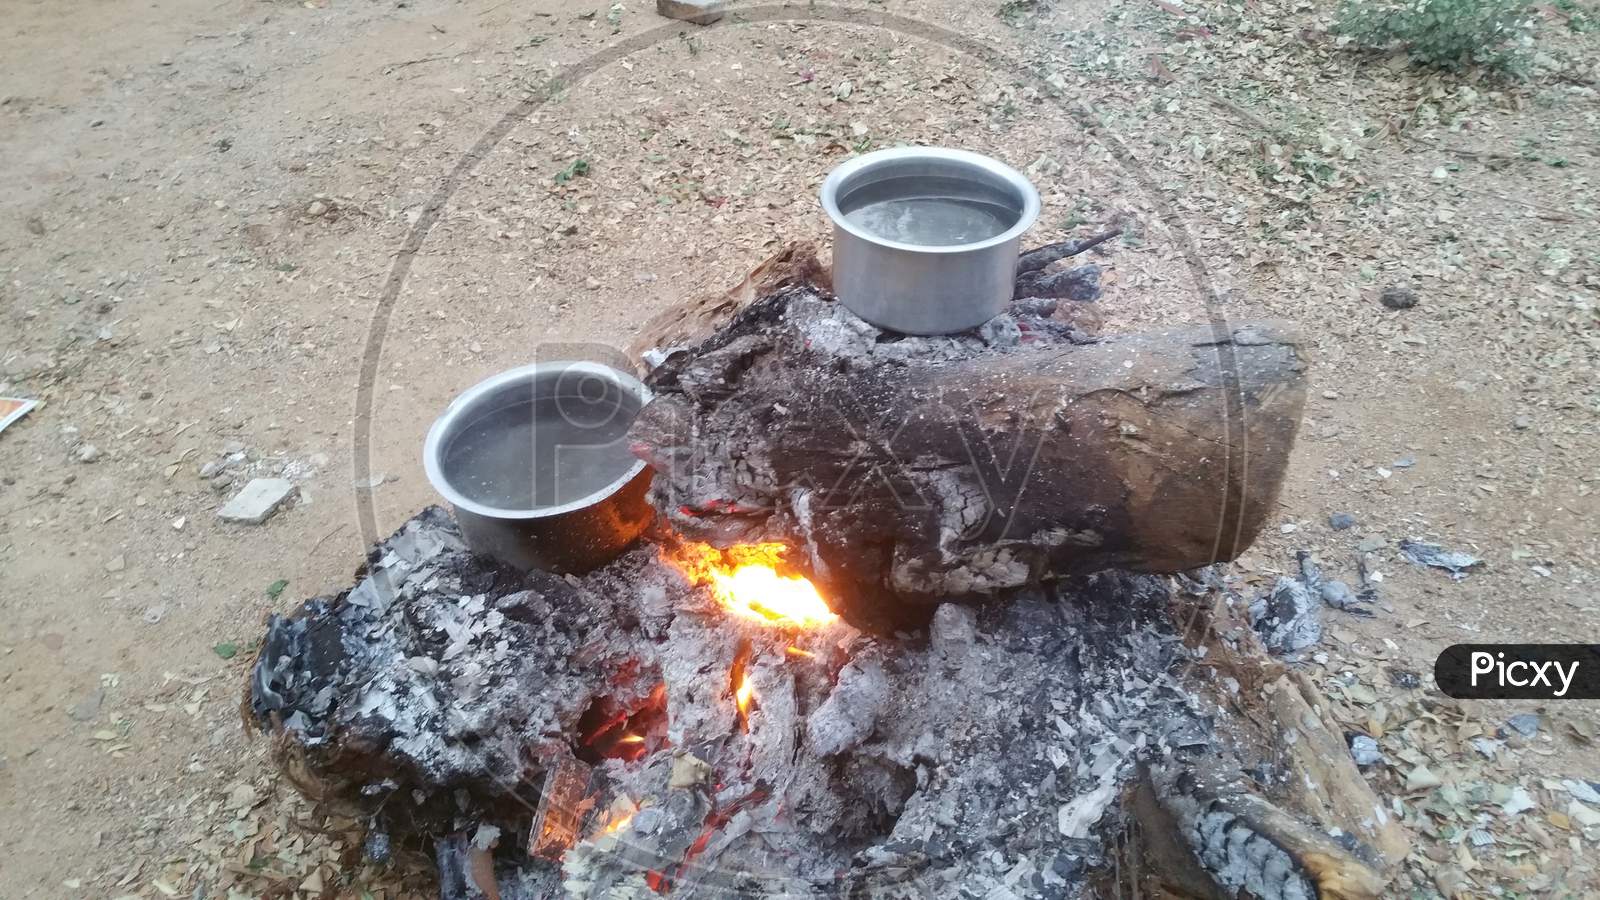 Water Heating in a Camp Fire